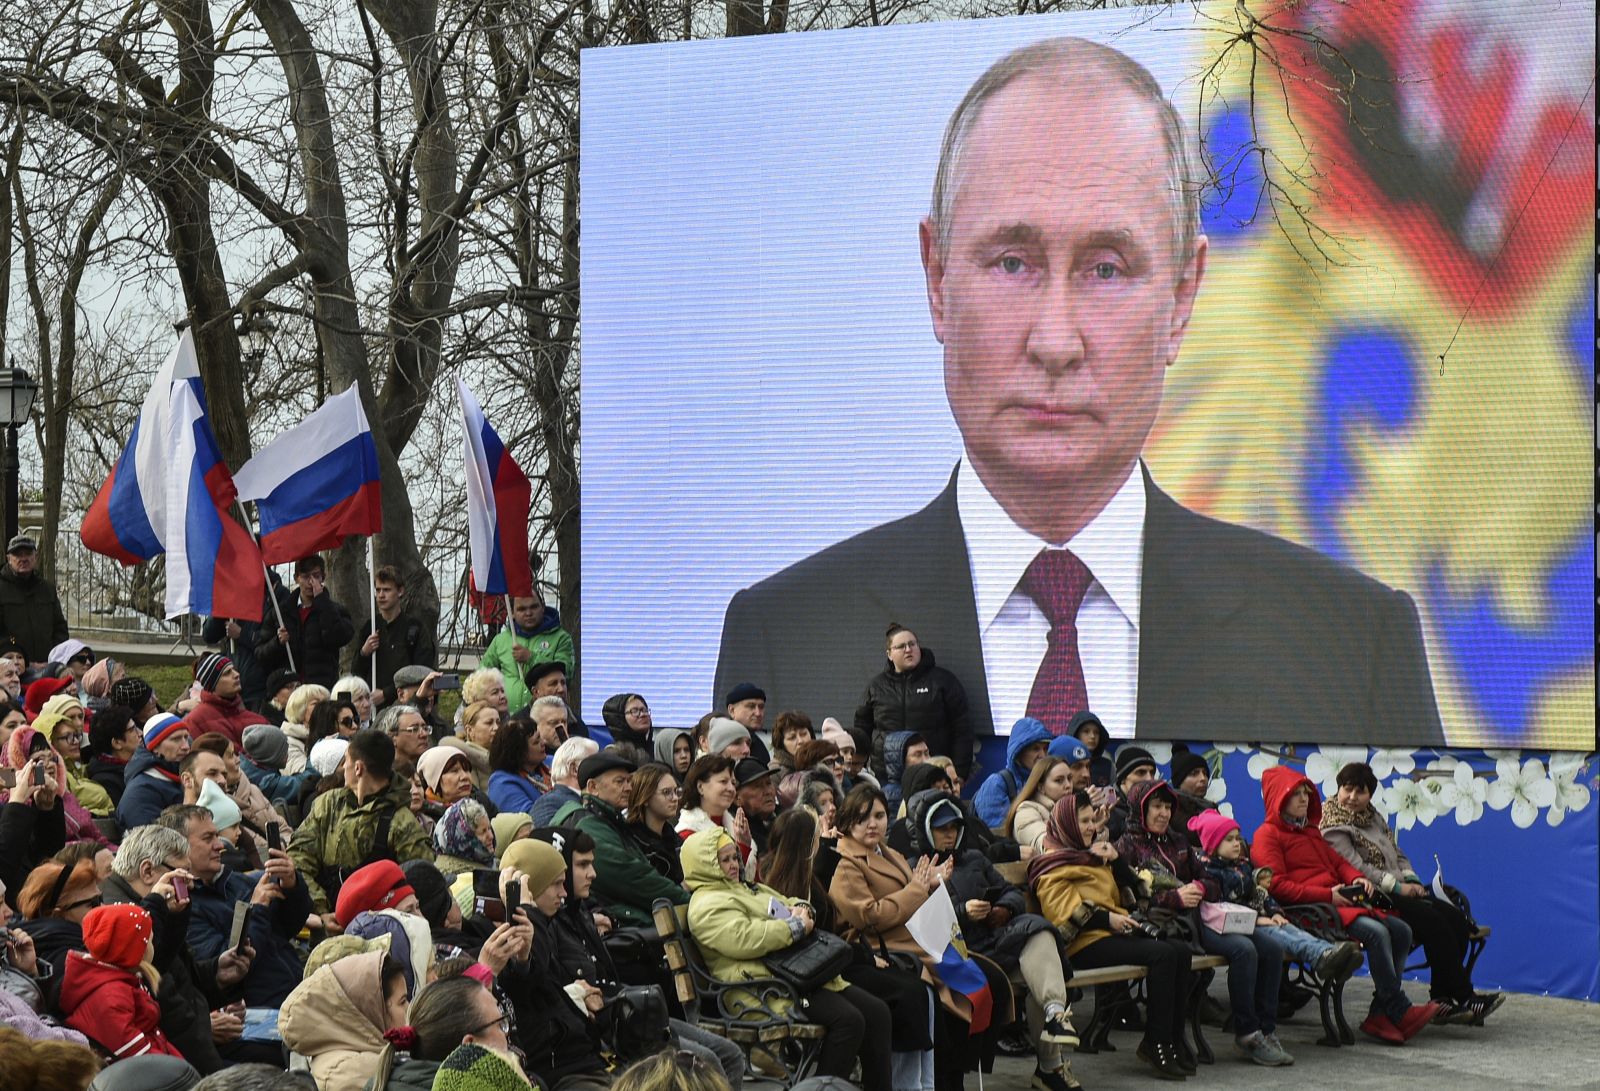 epa10530694 People sit under a screen with Russian President Vladimir Putin as they attend an event on the ninth anniversary of Russia's annexation of Crimea in Sevastopol, Crimea, 18 March 2023. Russia in 2014 annexed the Black Sea peninsula, shortly after Crimeans voted in a disputed referendum to secede from Ukraine. Russia declared the annexation of Crimea on 18 March 2014, two days tafter Crimeans voted in a disputed referendum to secede from Ukraine. The United Nations General Assembly in the Resolution 68/262 condemned the referendum in Crimea stating it had 'no validity'. Since 2015, Russia marks the 'Day of Reunification of Crimea with Russia' as a holiday annually on 18 March.  EPA/STRINGER